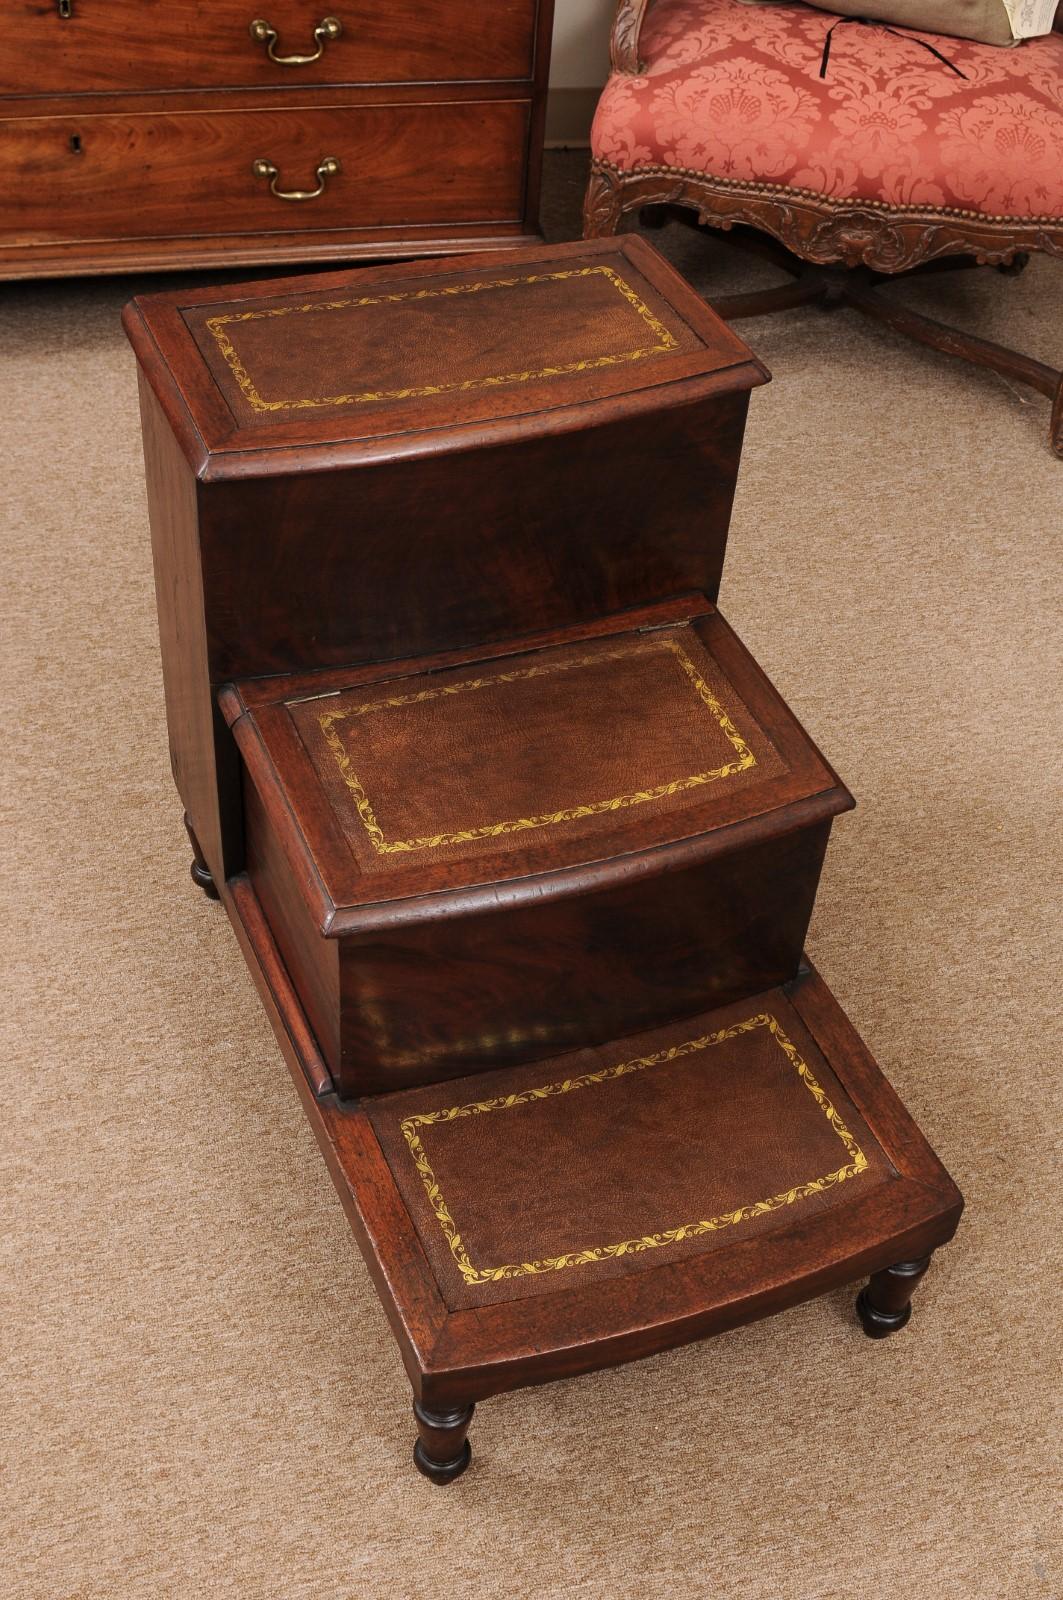  19th Century English Regency Library Steps in Mahogany with Embossed Leather For Sale 6